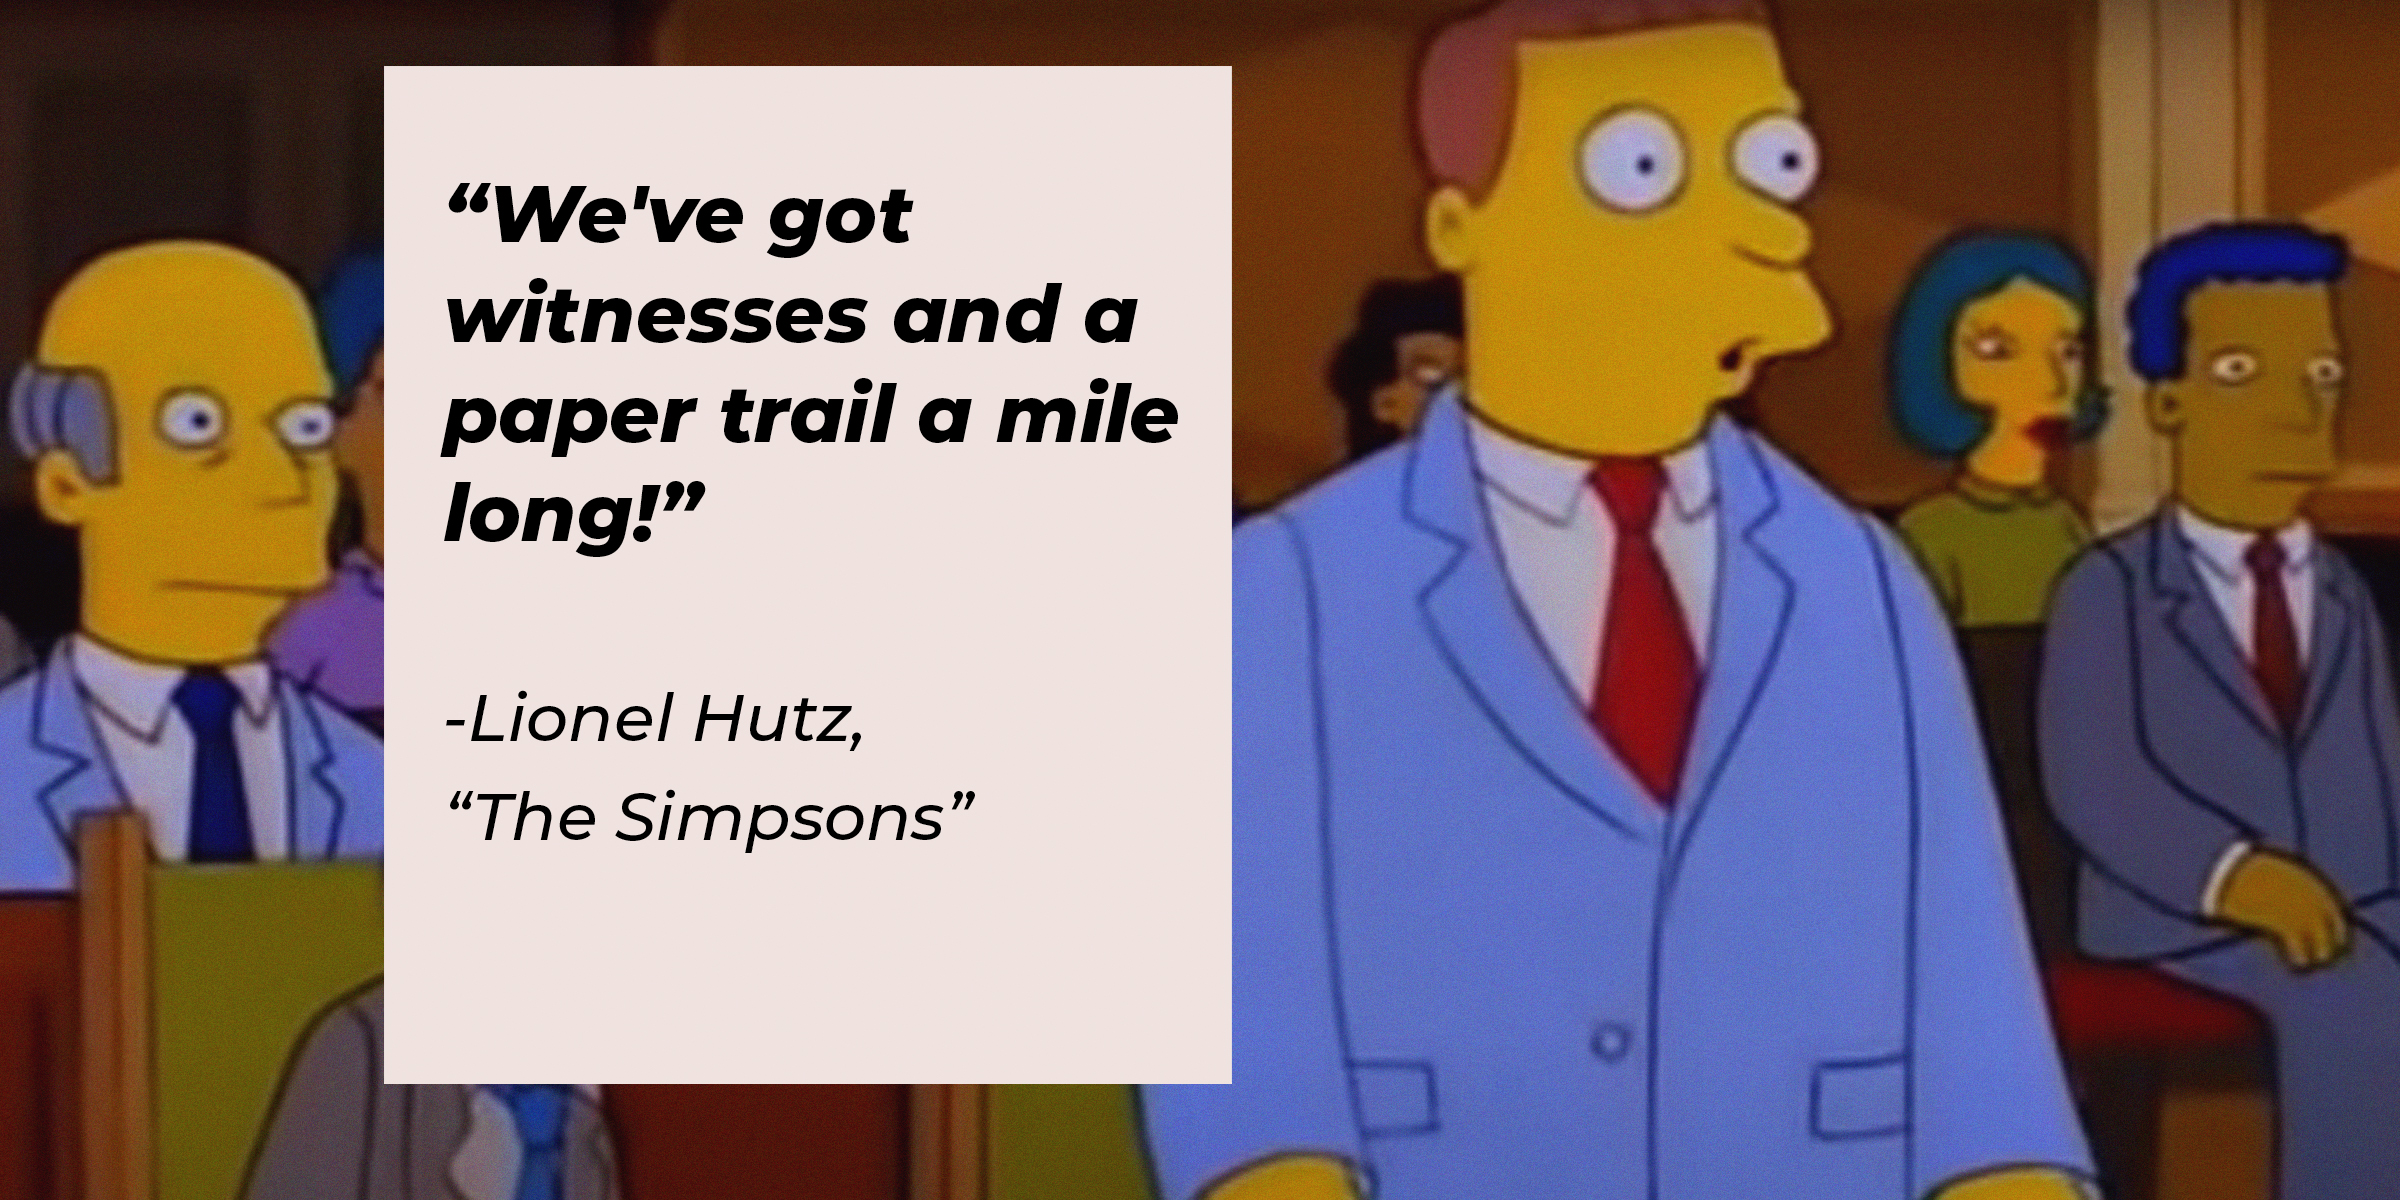 Lionel Hutz’s image with quote from “The Simpsons”: “We've got witnesses and a paper trail a mile long!” | Source: facebook.com/TheSimpsons